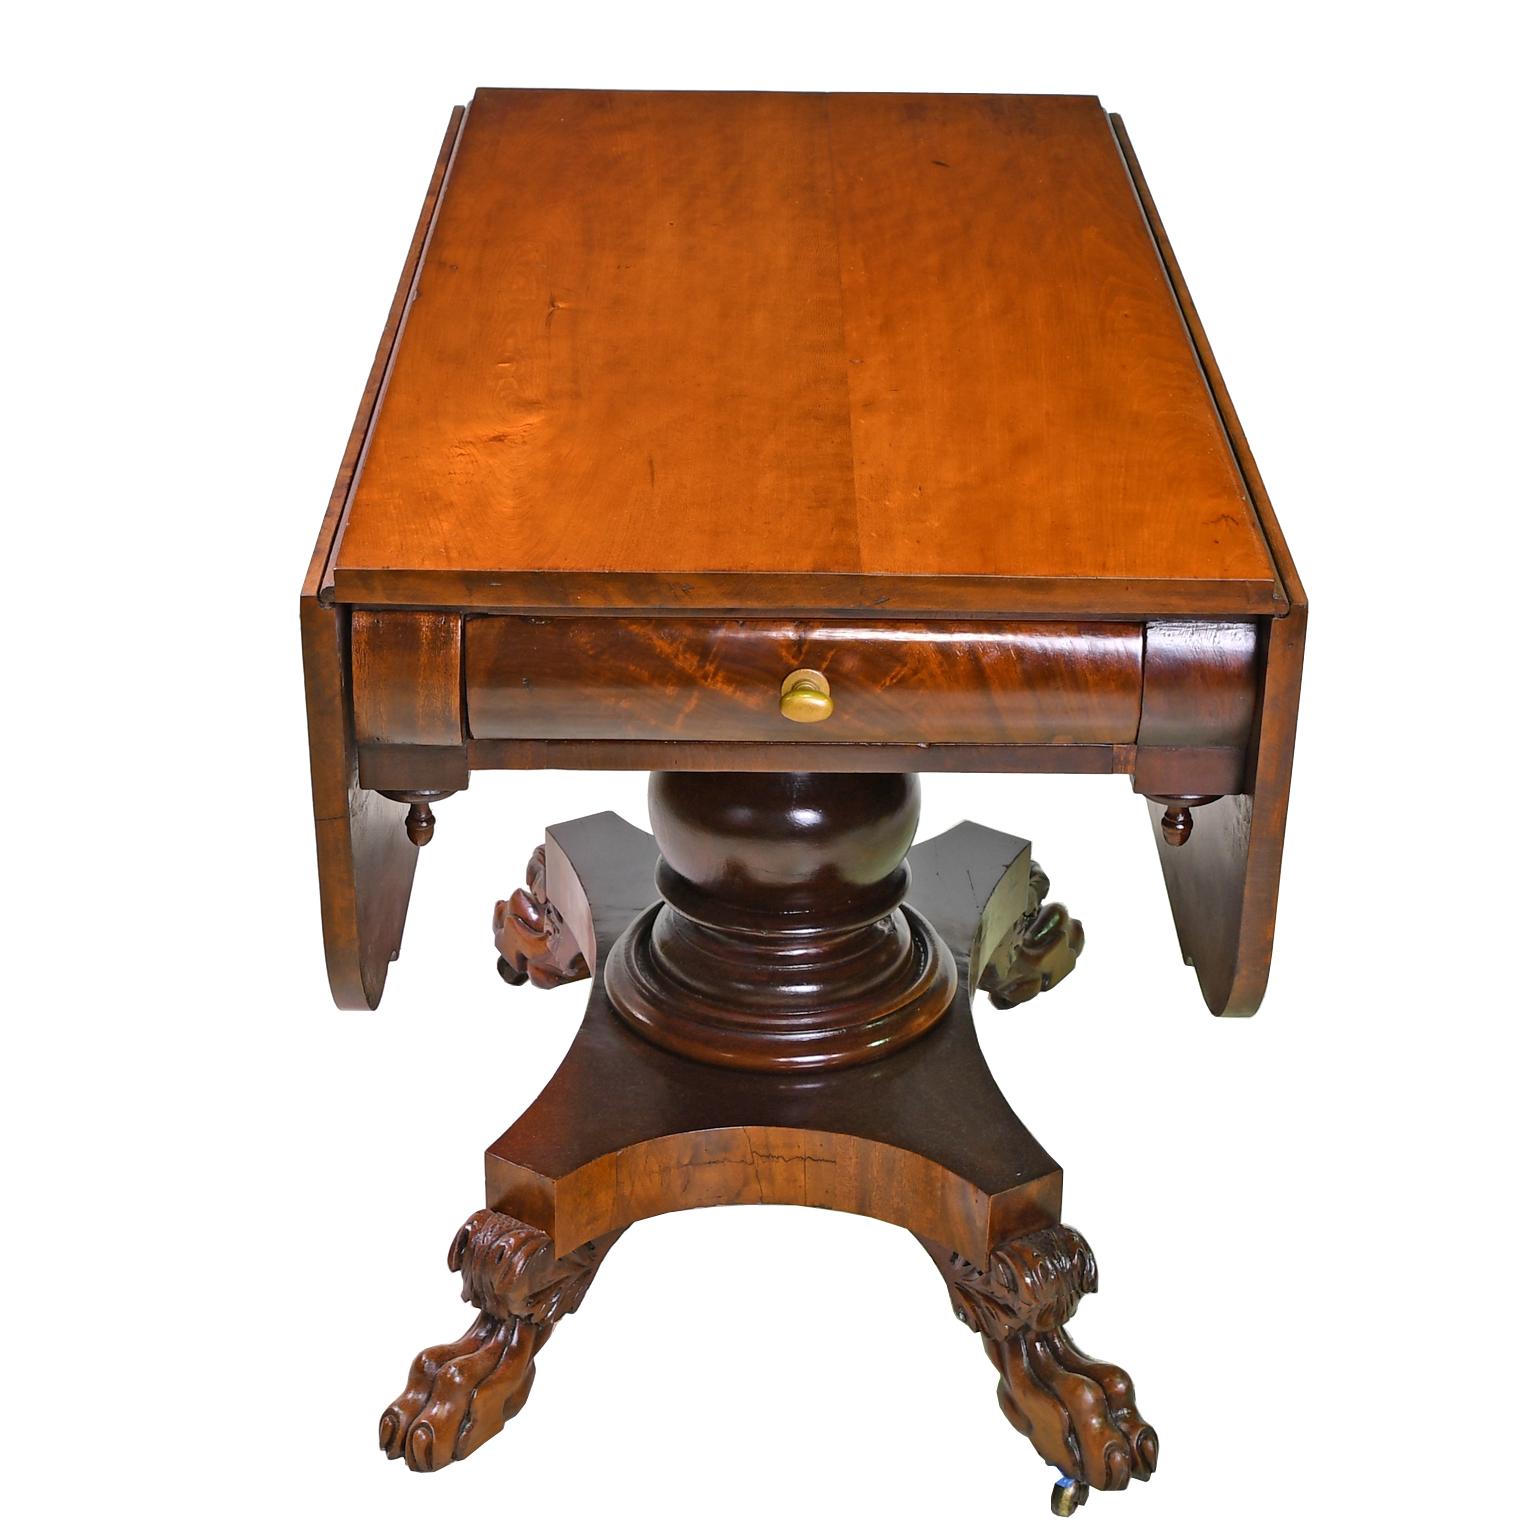 A handsome early American empire/classical pembroke table in fine West Indies mahogany with solid rectangular top offering two hinged drop-leaves with 